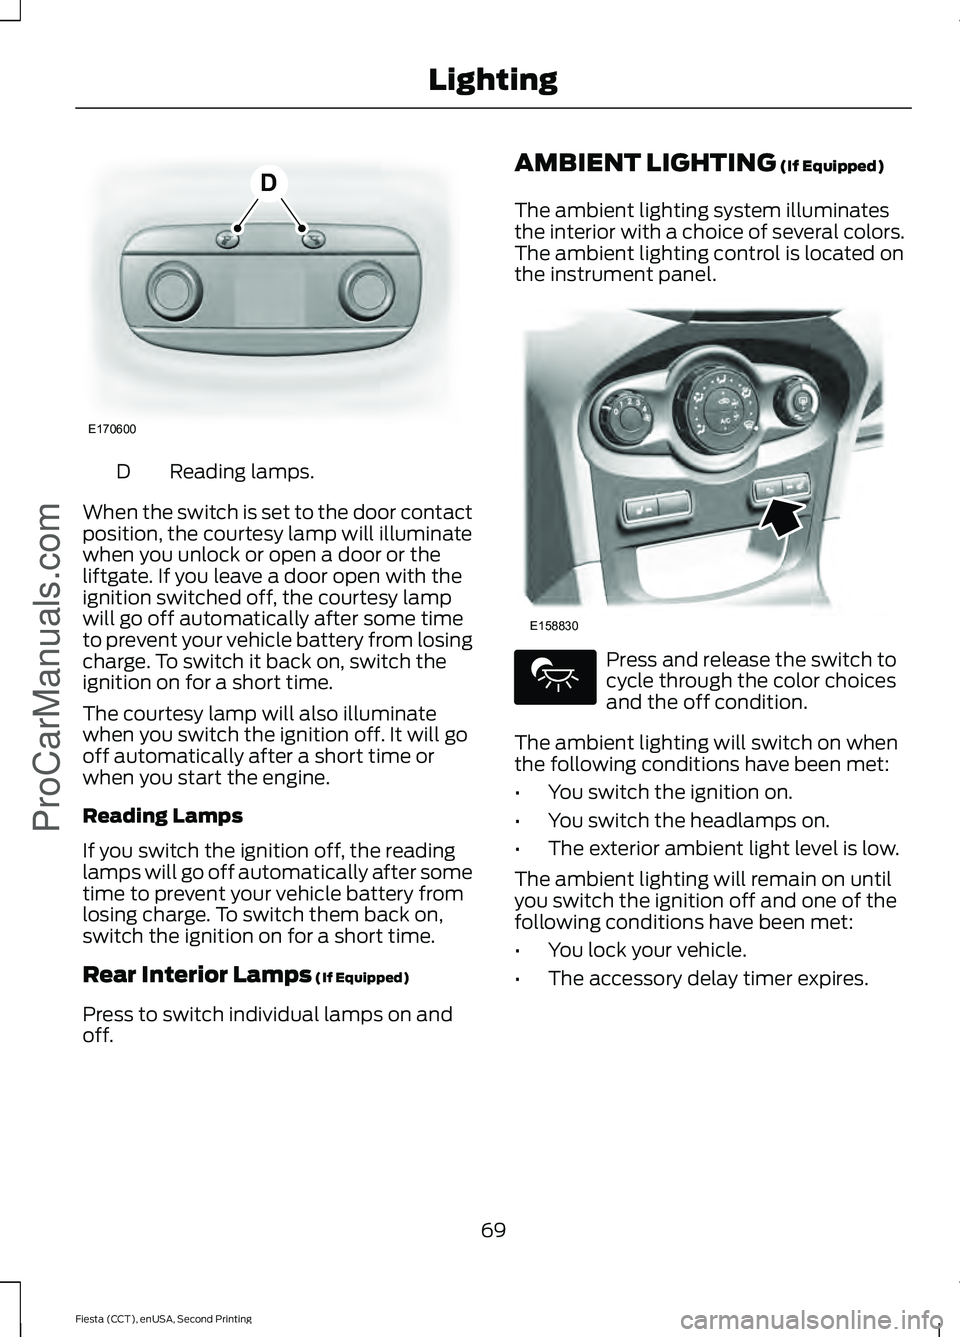 FORD FIESTA 2015 Manual PDF Reading lamps.
D
When the switch is set to the door contact
position, the courtesy lamp will illuminate
when you unlock or open a door or the
liftgate. If you leave a door open with the
ignition switc